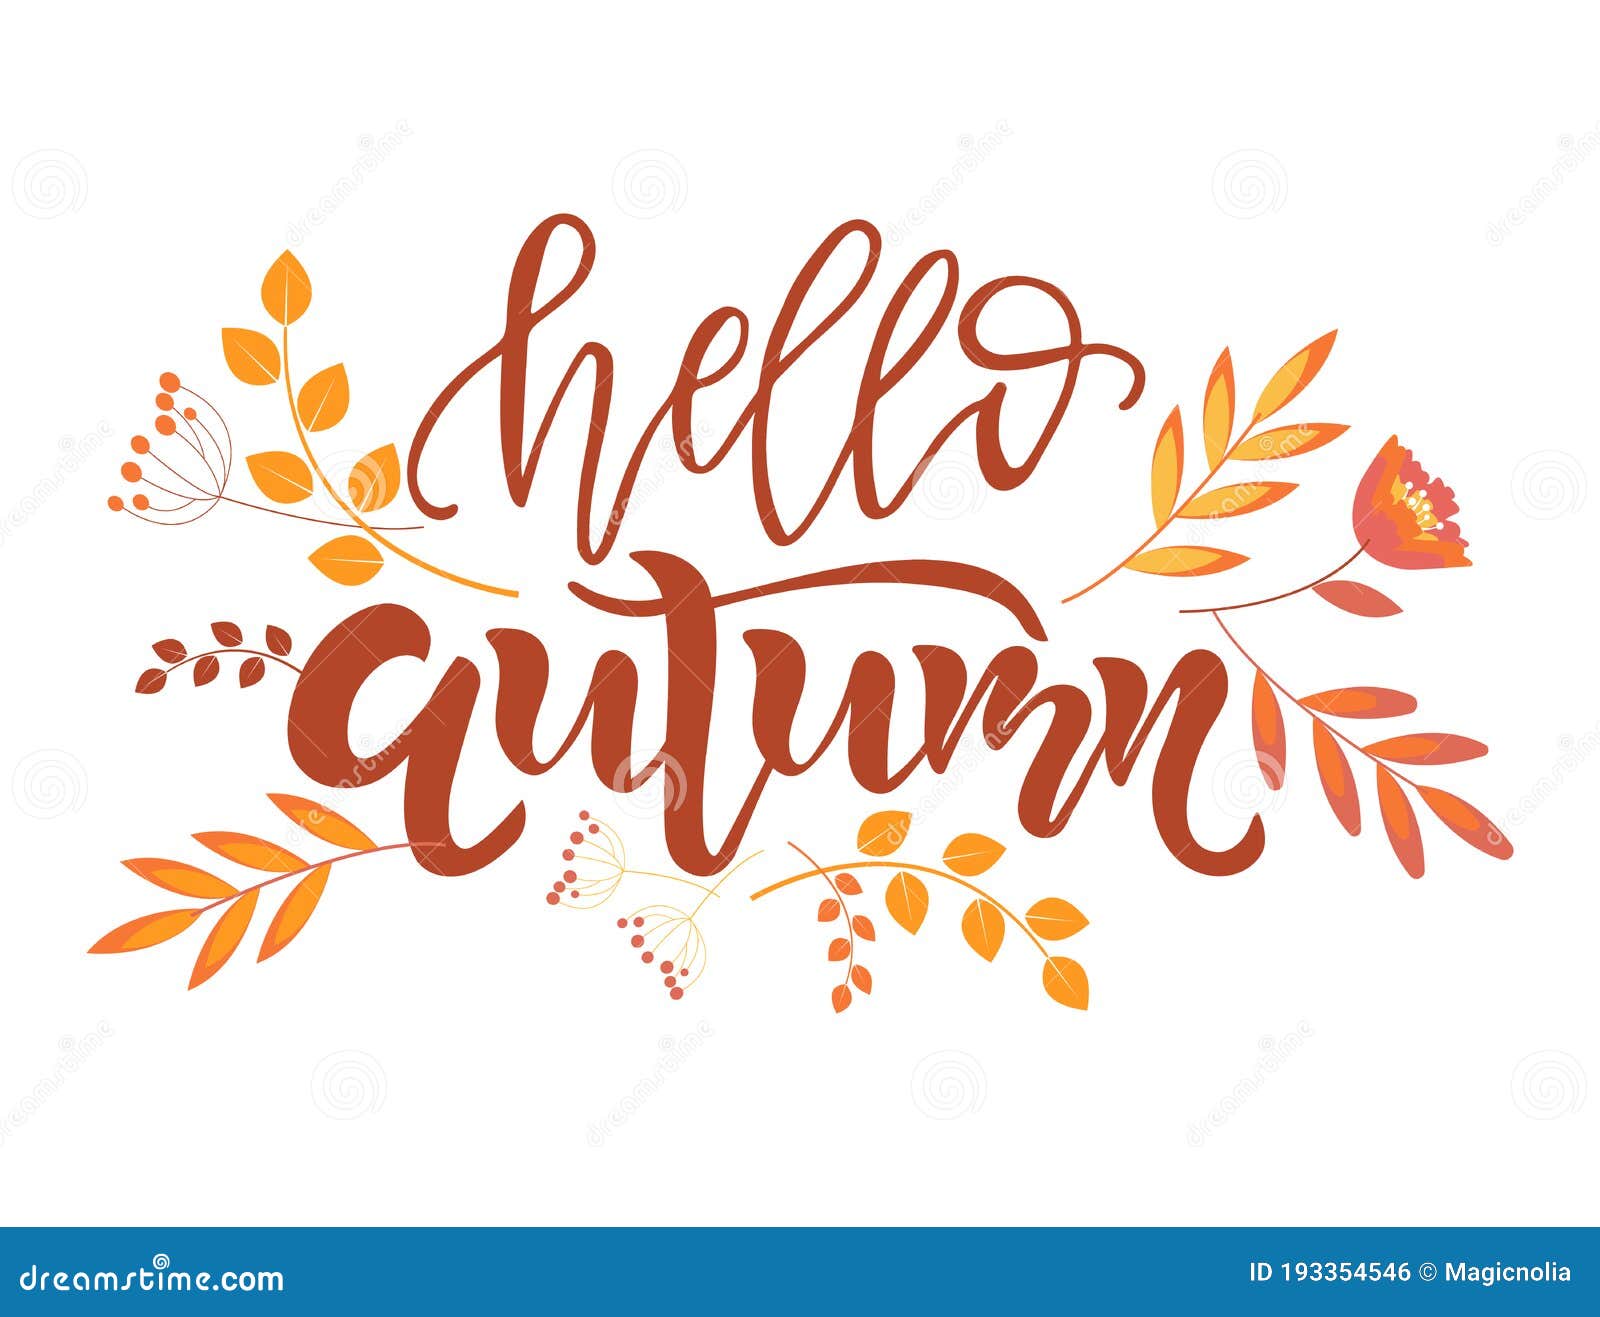 Hello Autumn Lettering Design. Calligraphy Text for Poster Stock Vector ...